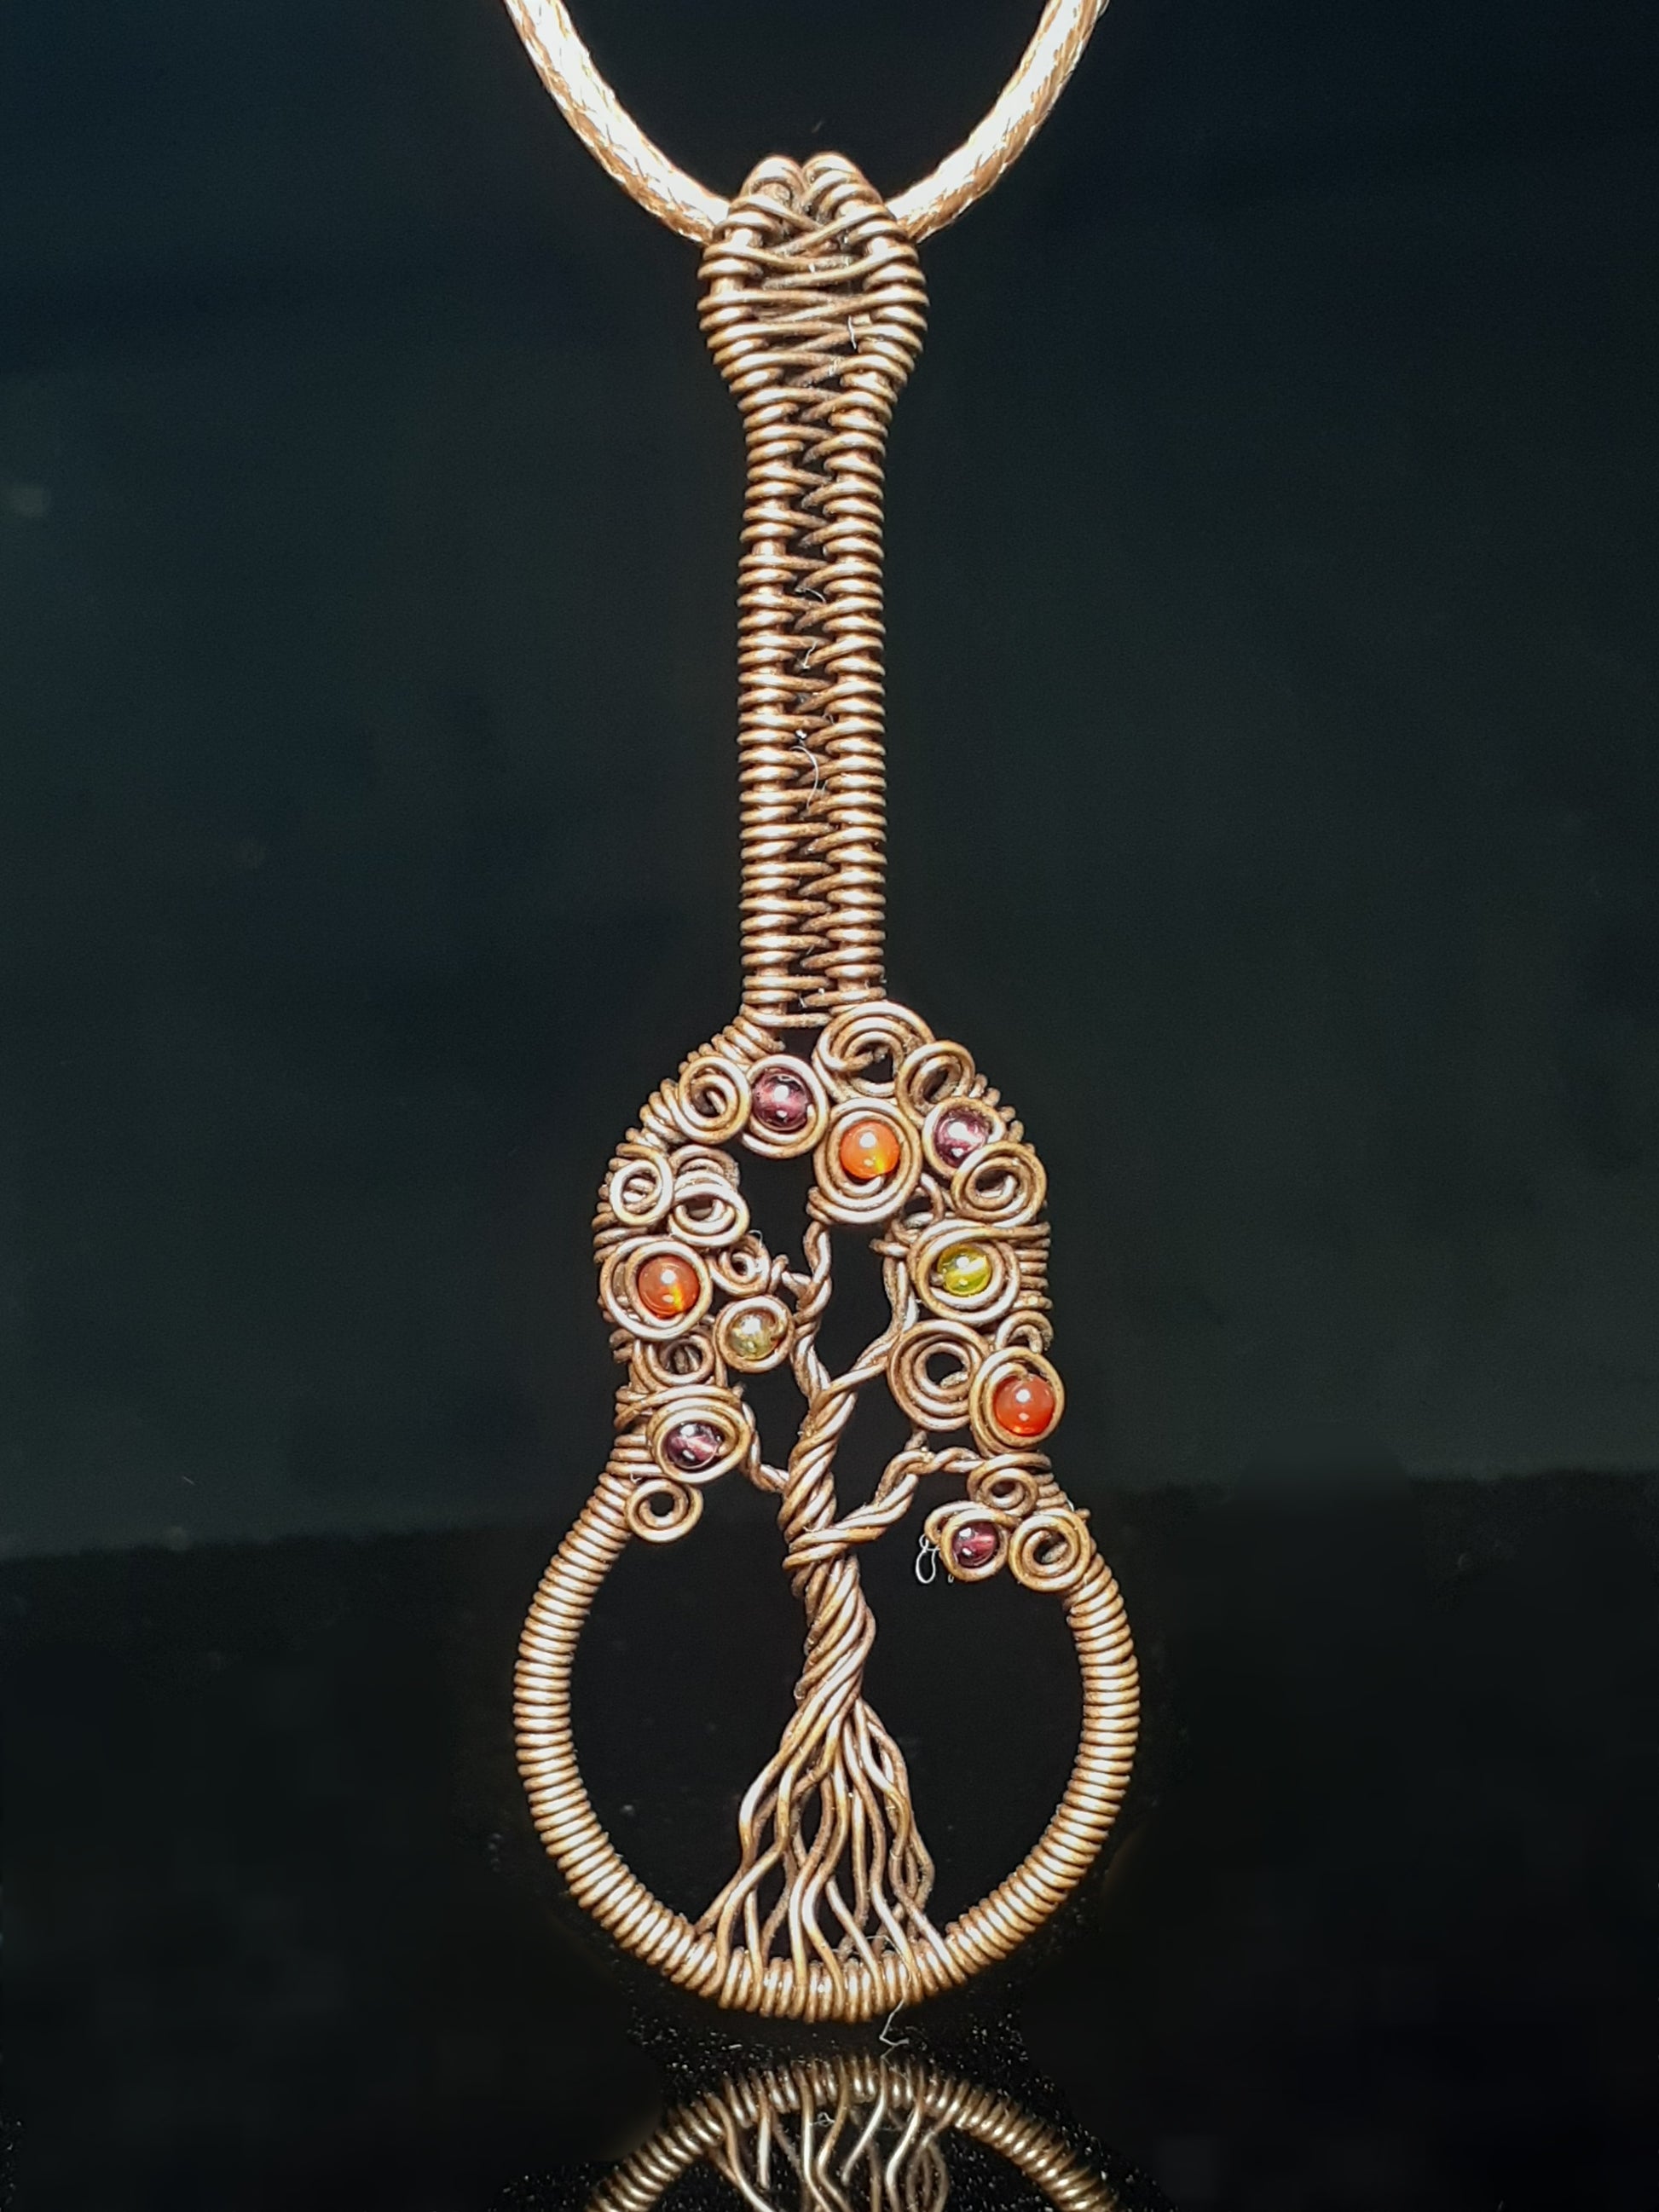 Autumn Colored Tree Of Life Guitar Pendent Artist: Lindsey Griffin Agate beads in Autumn colors wrapped in oxidized copper  Leather cord to wear as a necklace  2 7/8" Long x 1" Wide x 1/4" Deep  Care instructions and polishing cloth included  A beautiful delicate necklace for everyday use